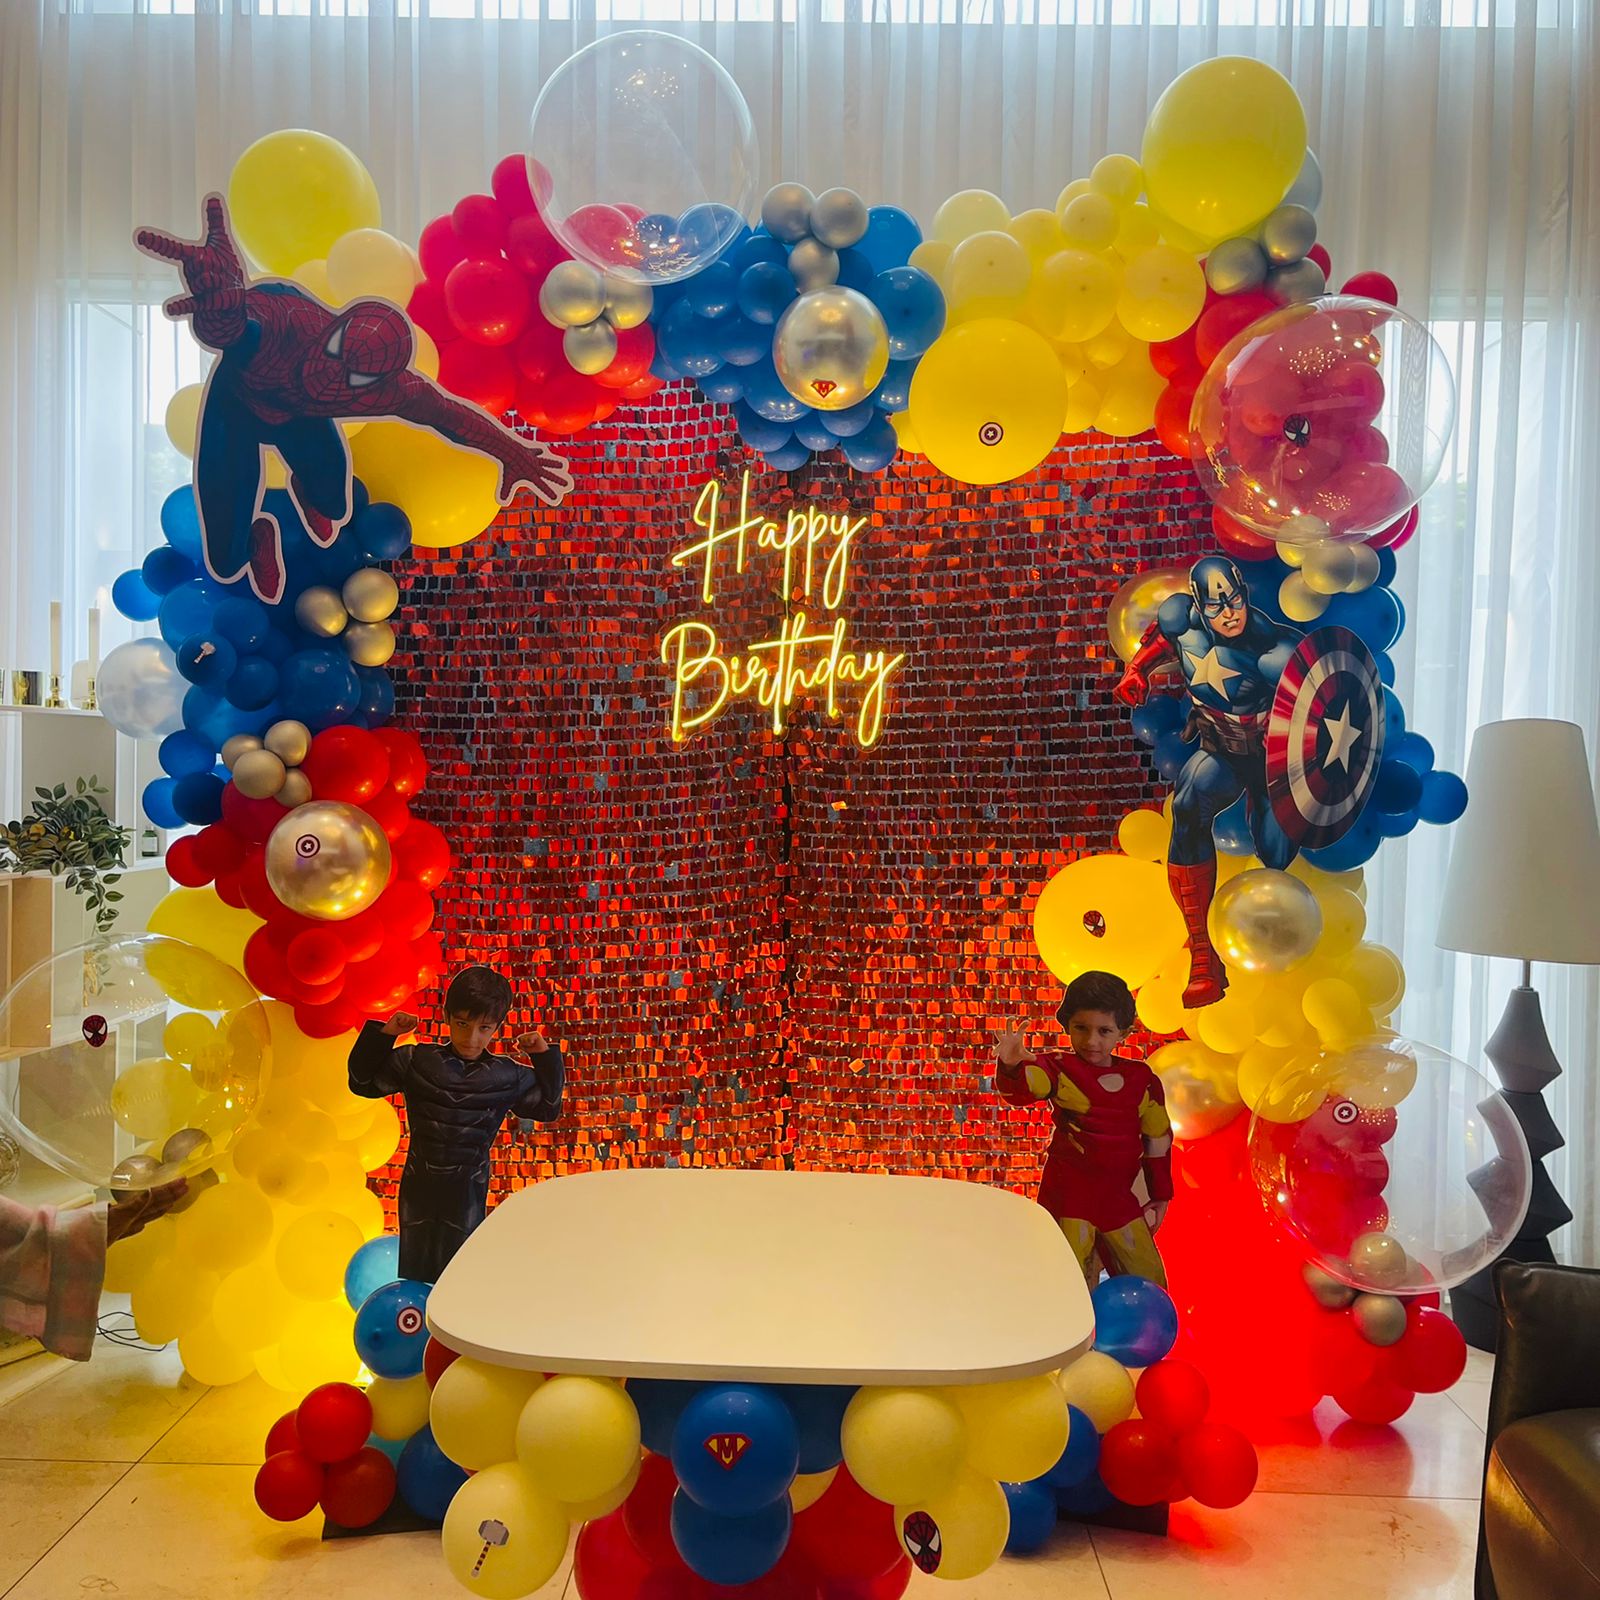 Urban Events, : #CUSTOMIZED BIRTHDAY DECOR IN PUNE  # EVENT PLANNERS IN PUNE  # PARTY DECORATORS IN VIMAN NAGAR  # PARTY PLANNERS IN MAHARASHTRA #THEME BASED PARTY ORGANIZER IN PUNE  # THEME BASED PARTY ORGANIZER I